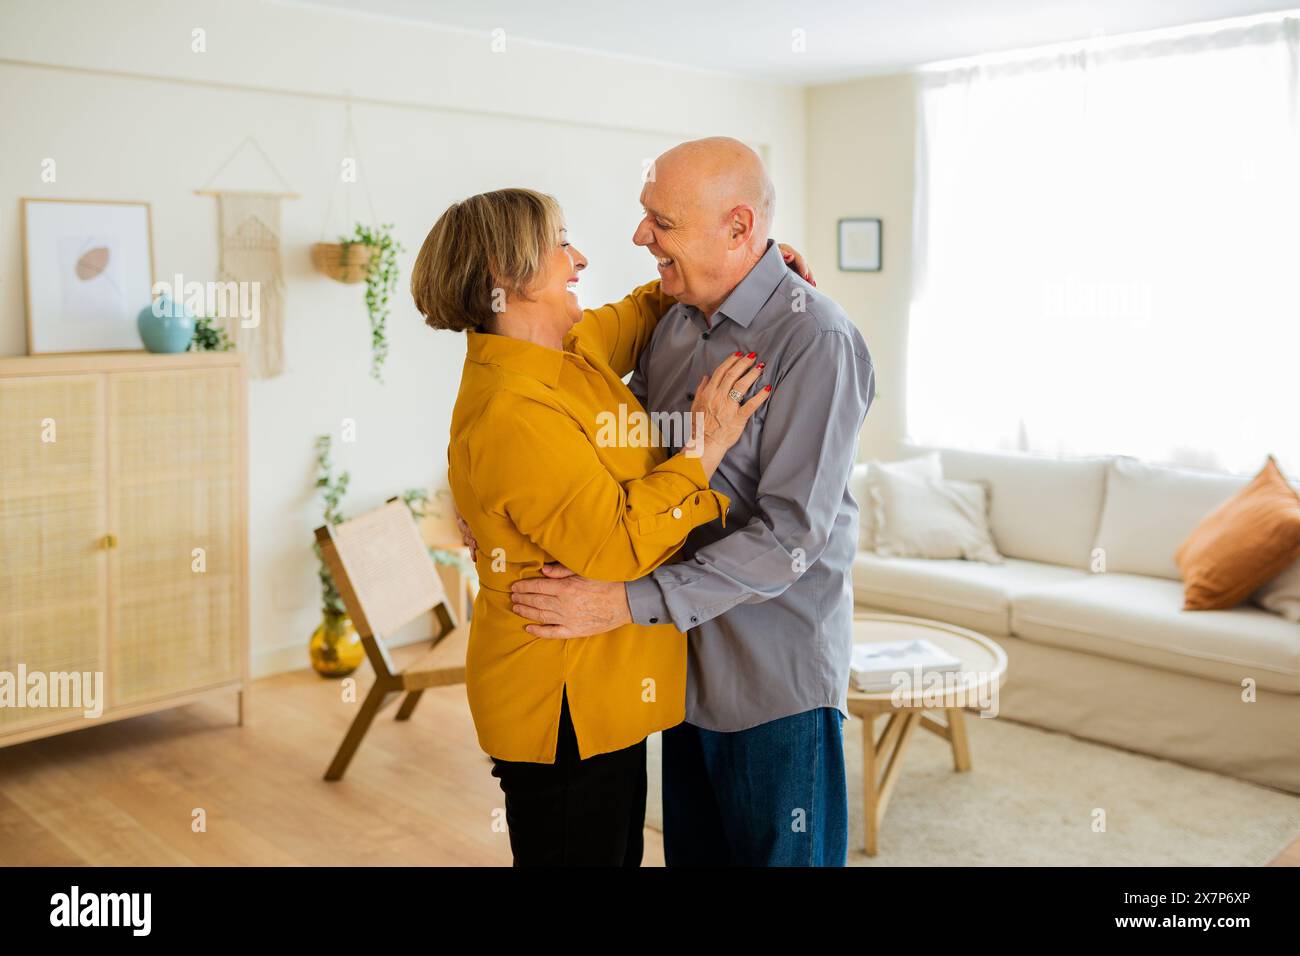 Senior couple dancing together in their living room, smiling and looking into each other's eyes. Couple enjoying a tender moment at home. Stock Photo